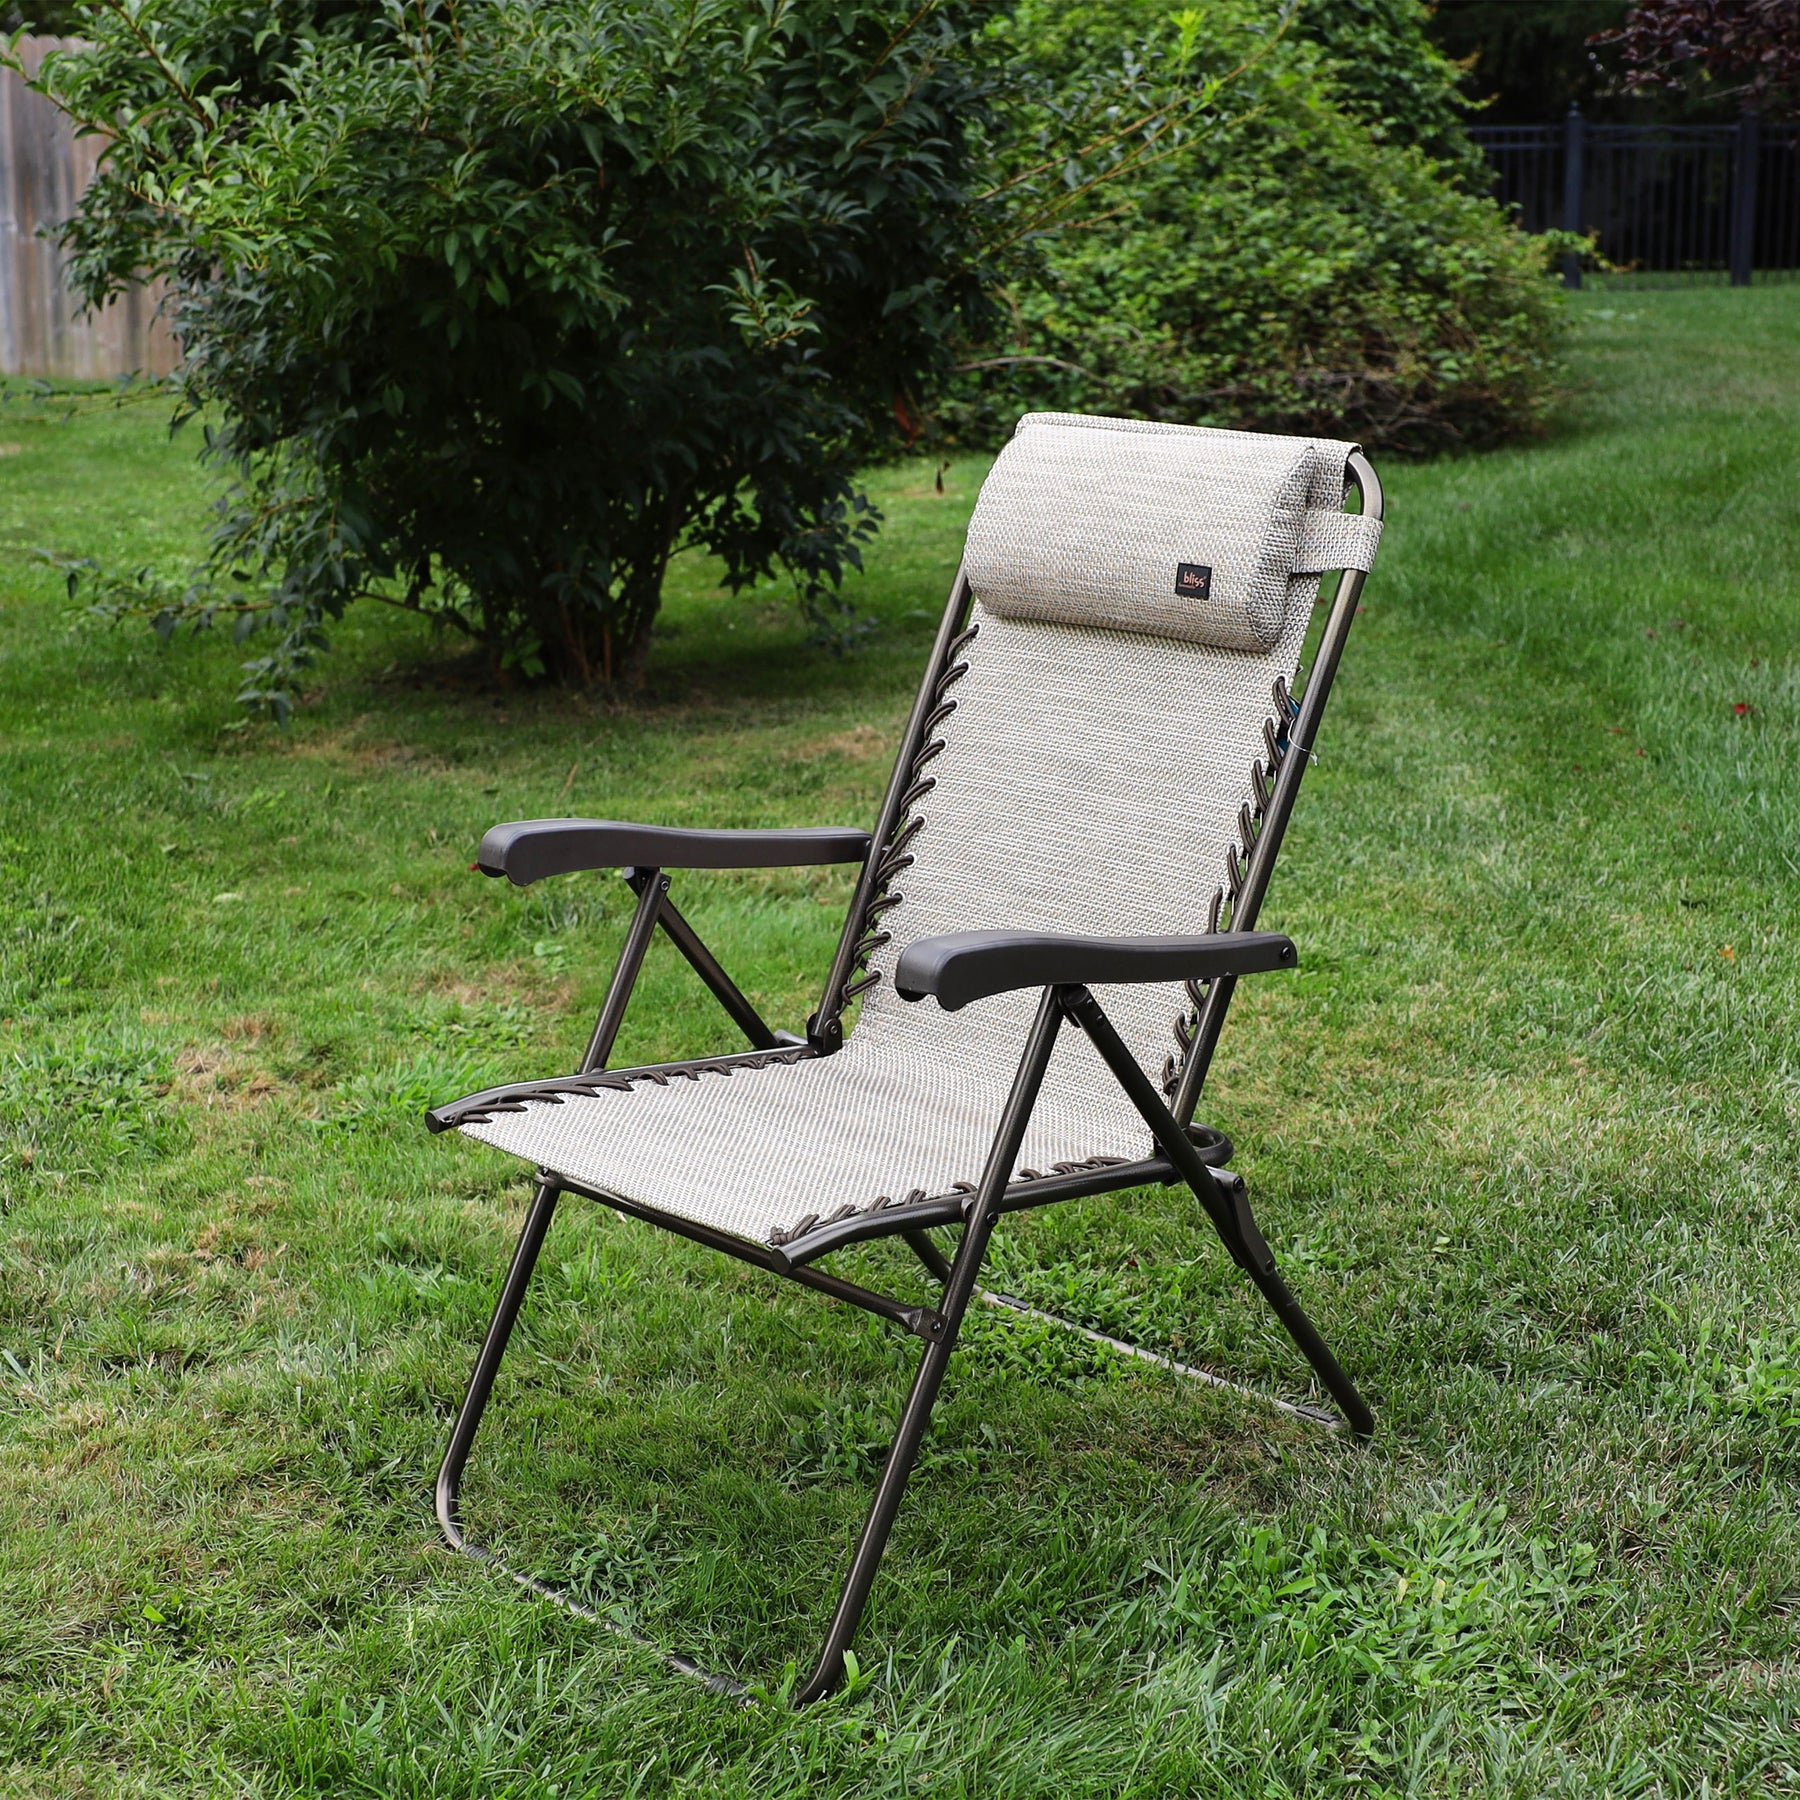 26-inch Reclining Sand Sling Chair on a lawn.